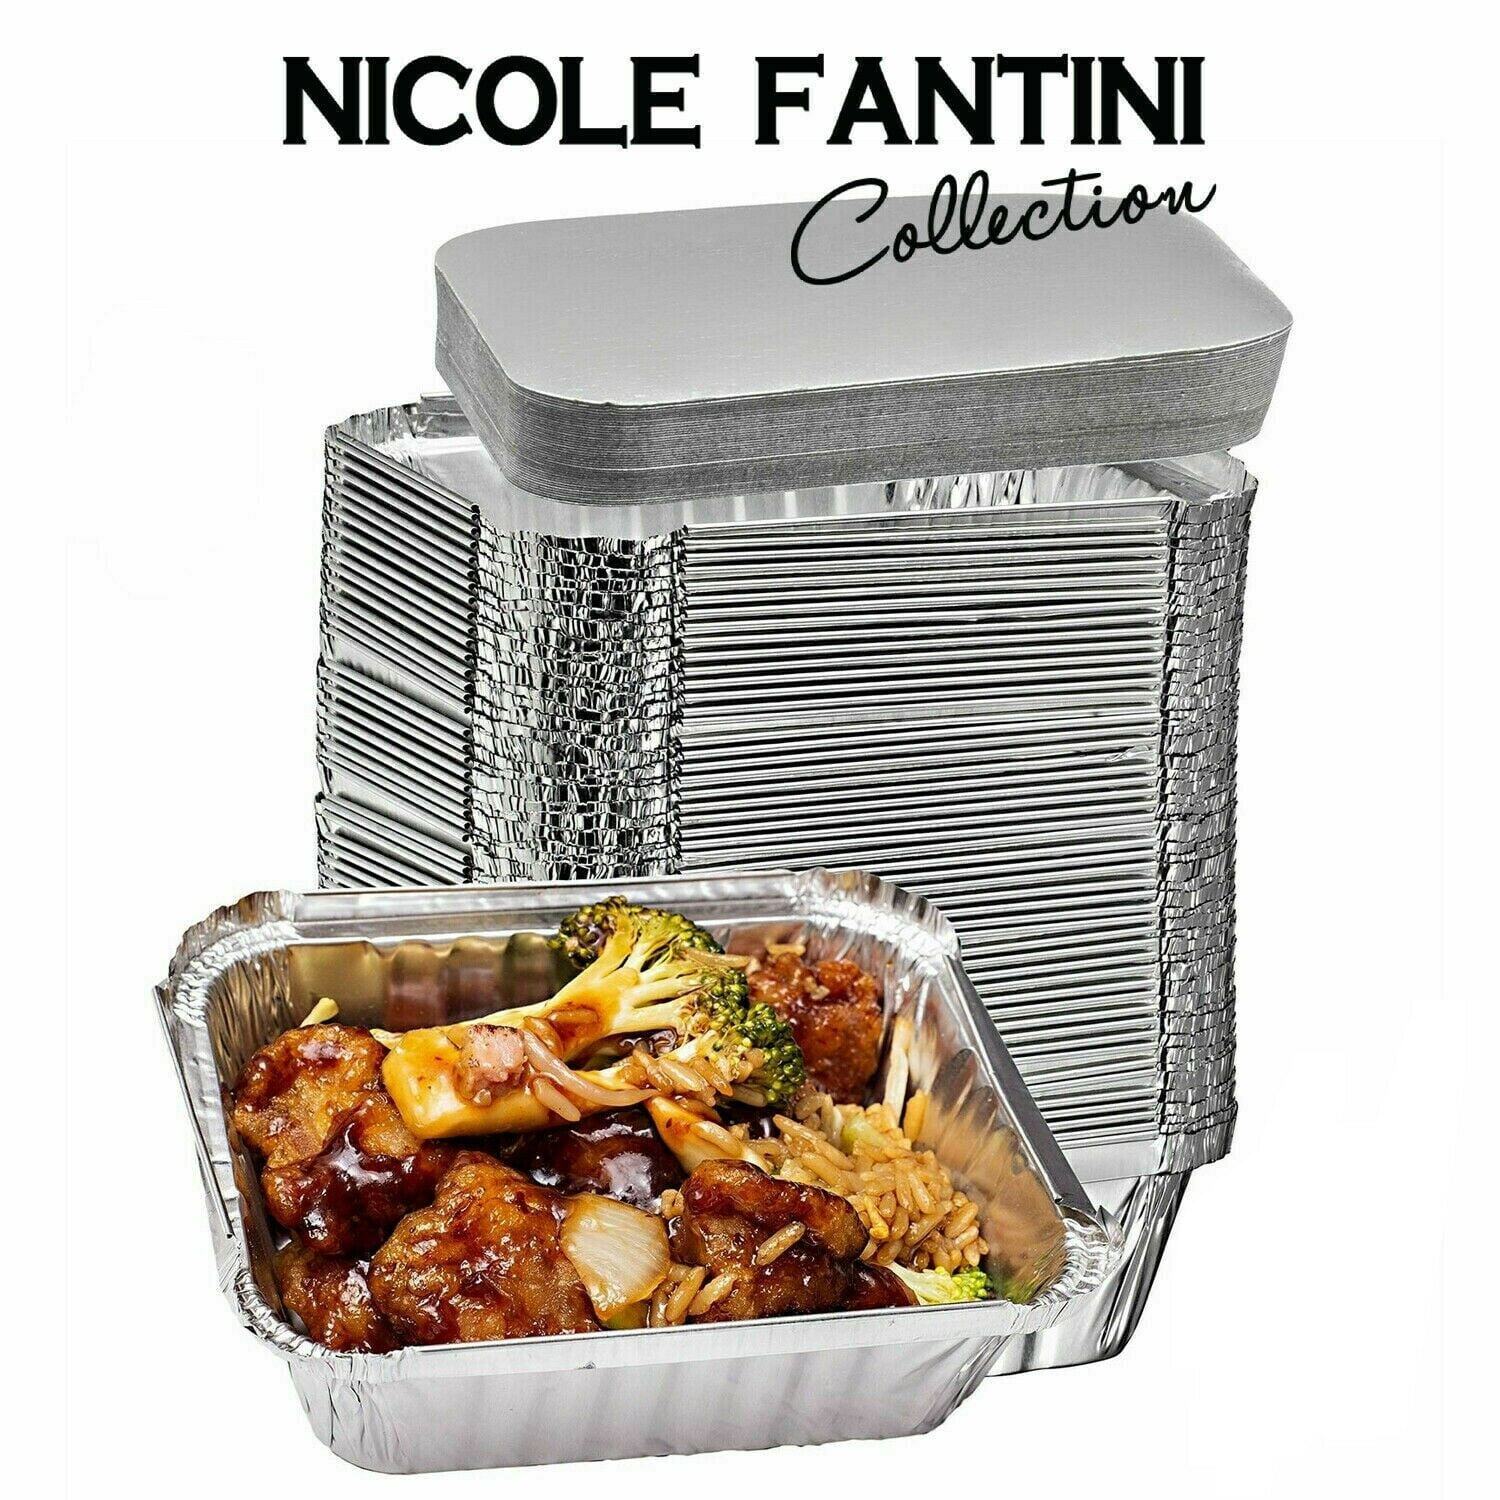 Nicole Fantini's Disposable 9x13 Aluminum Foil/Pan with Aluminum Lids Half Size Deep Steam Table Bakeware - Cookware Perfect for Baking Cakes, Bread